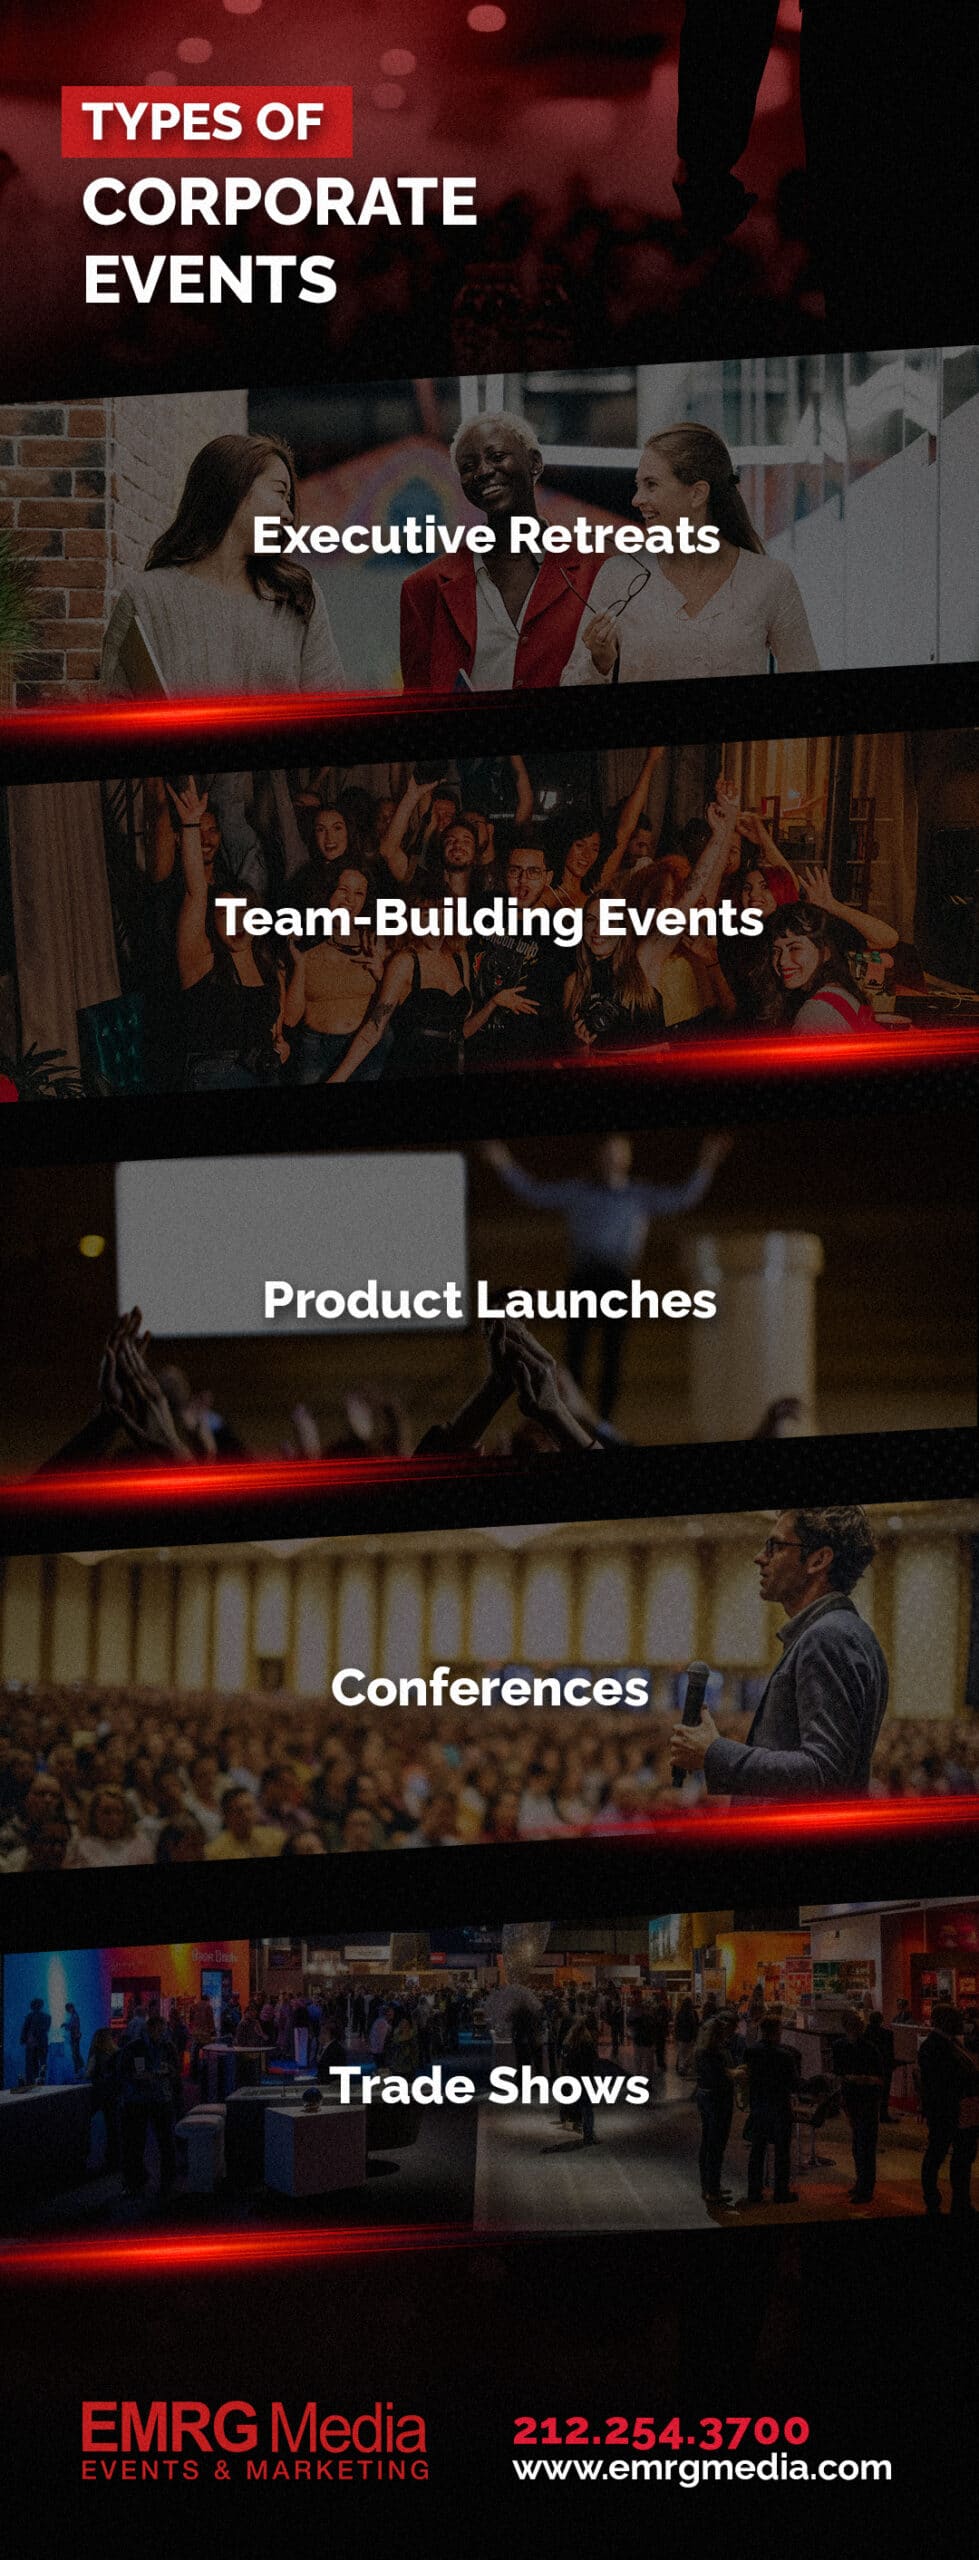 Types of Corporate Events